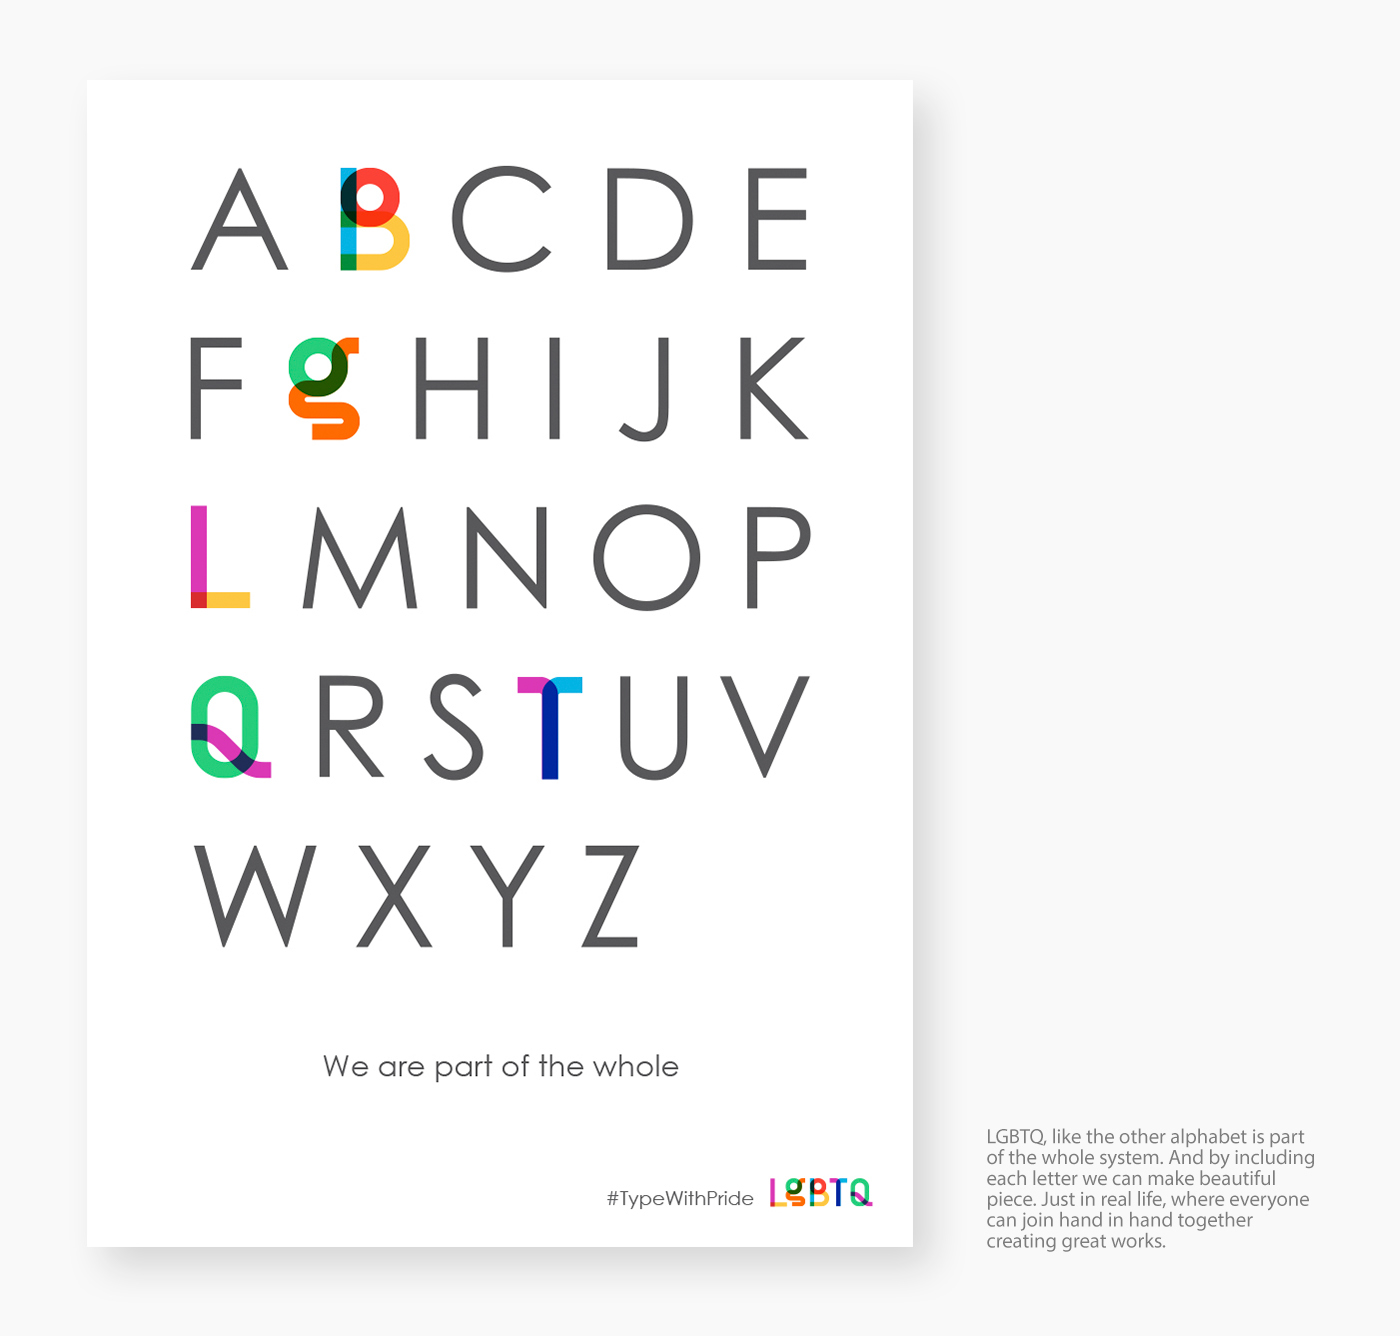 TypeWithPride LGBT poster campaign minimalist White social pride